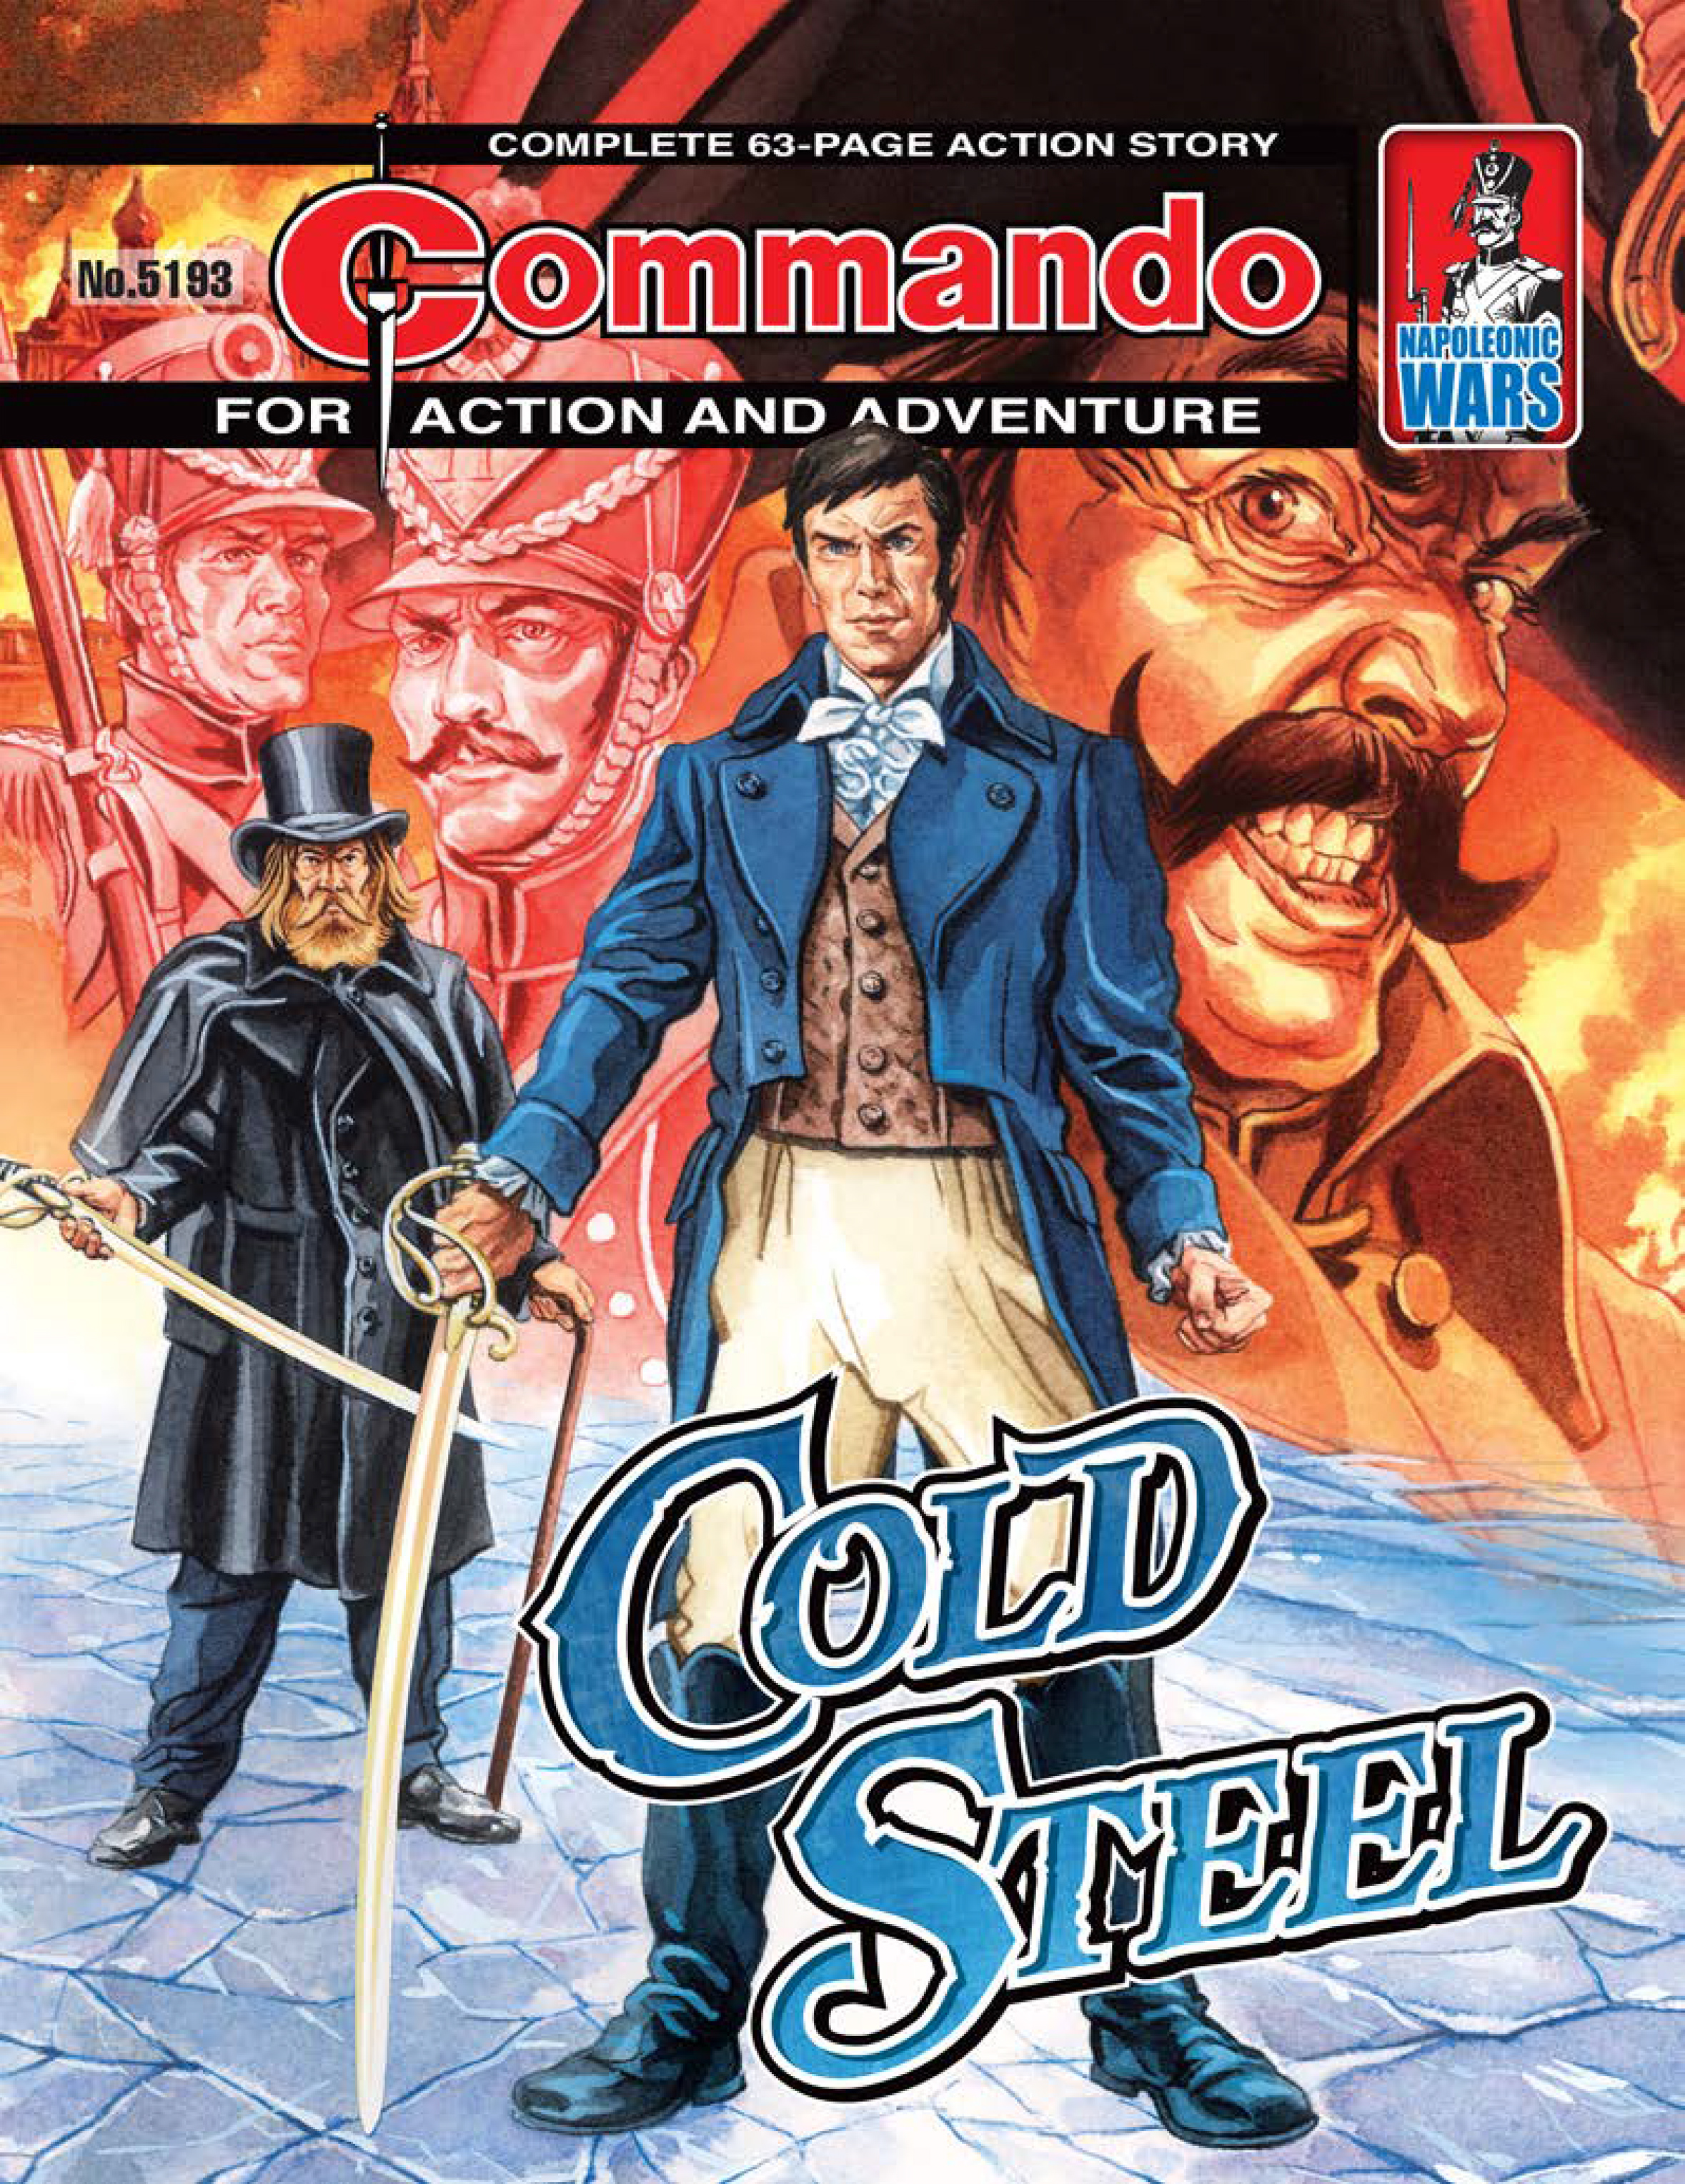 Read online Commando: For Action and Adventure comic -  Issue #5193 - 1